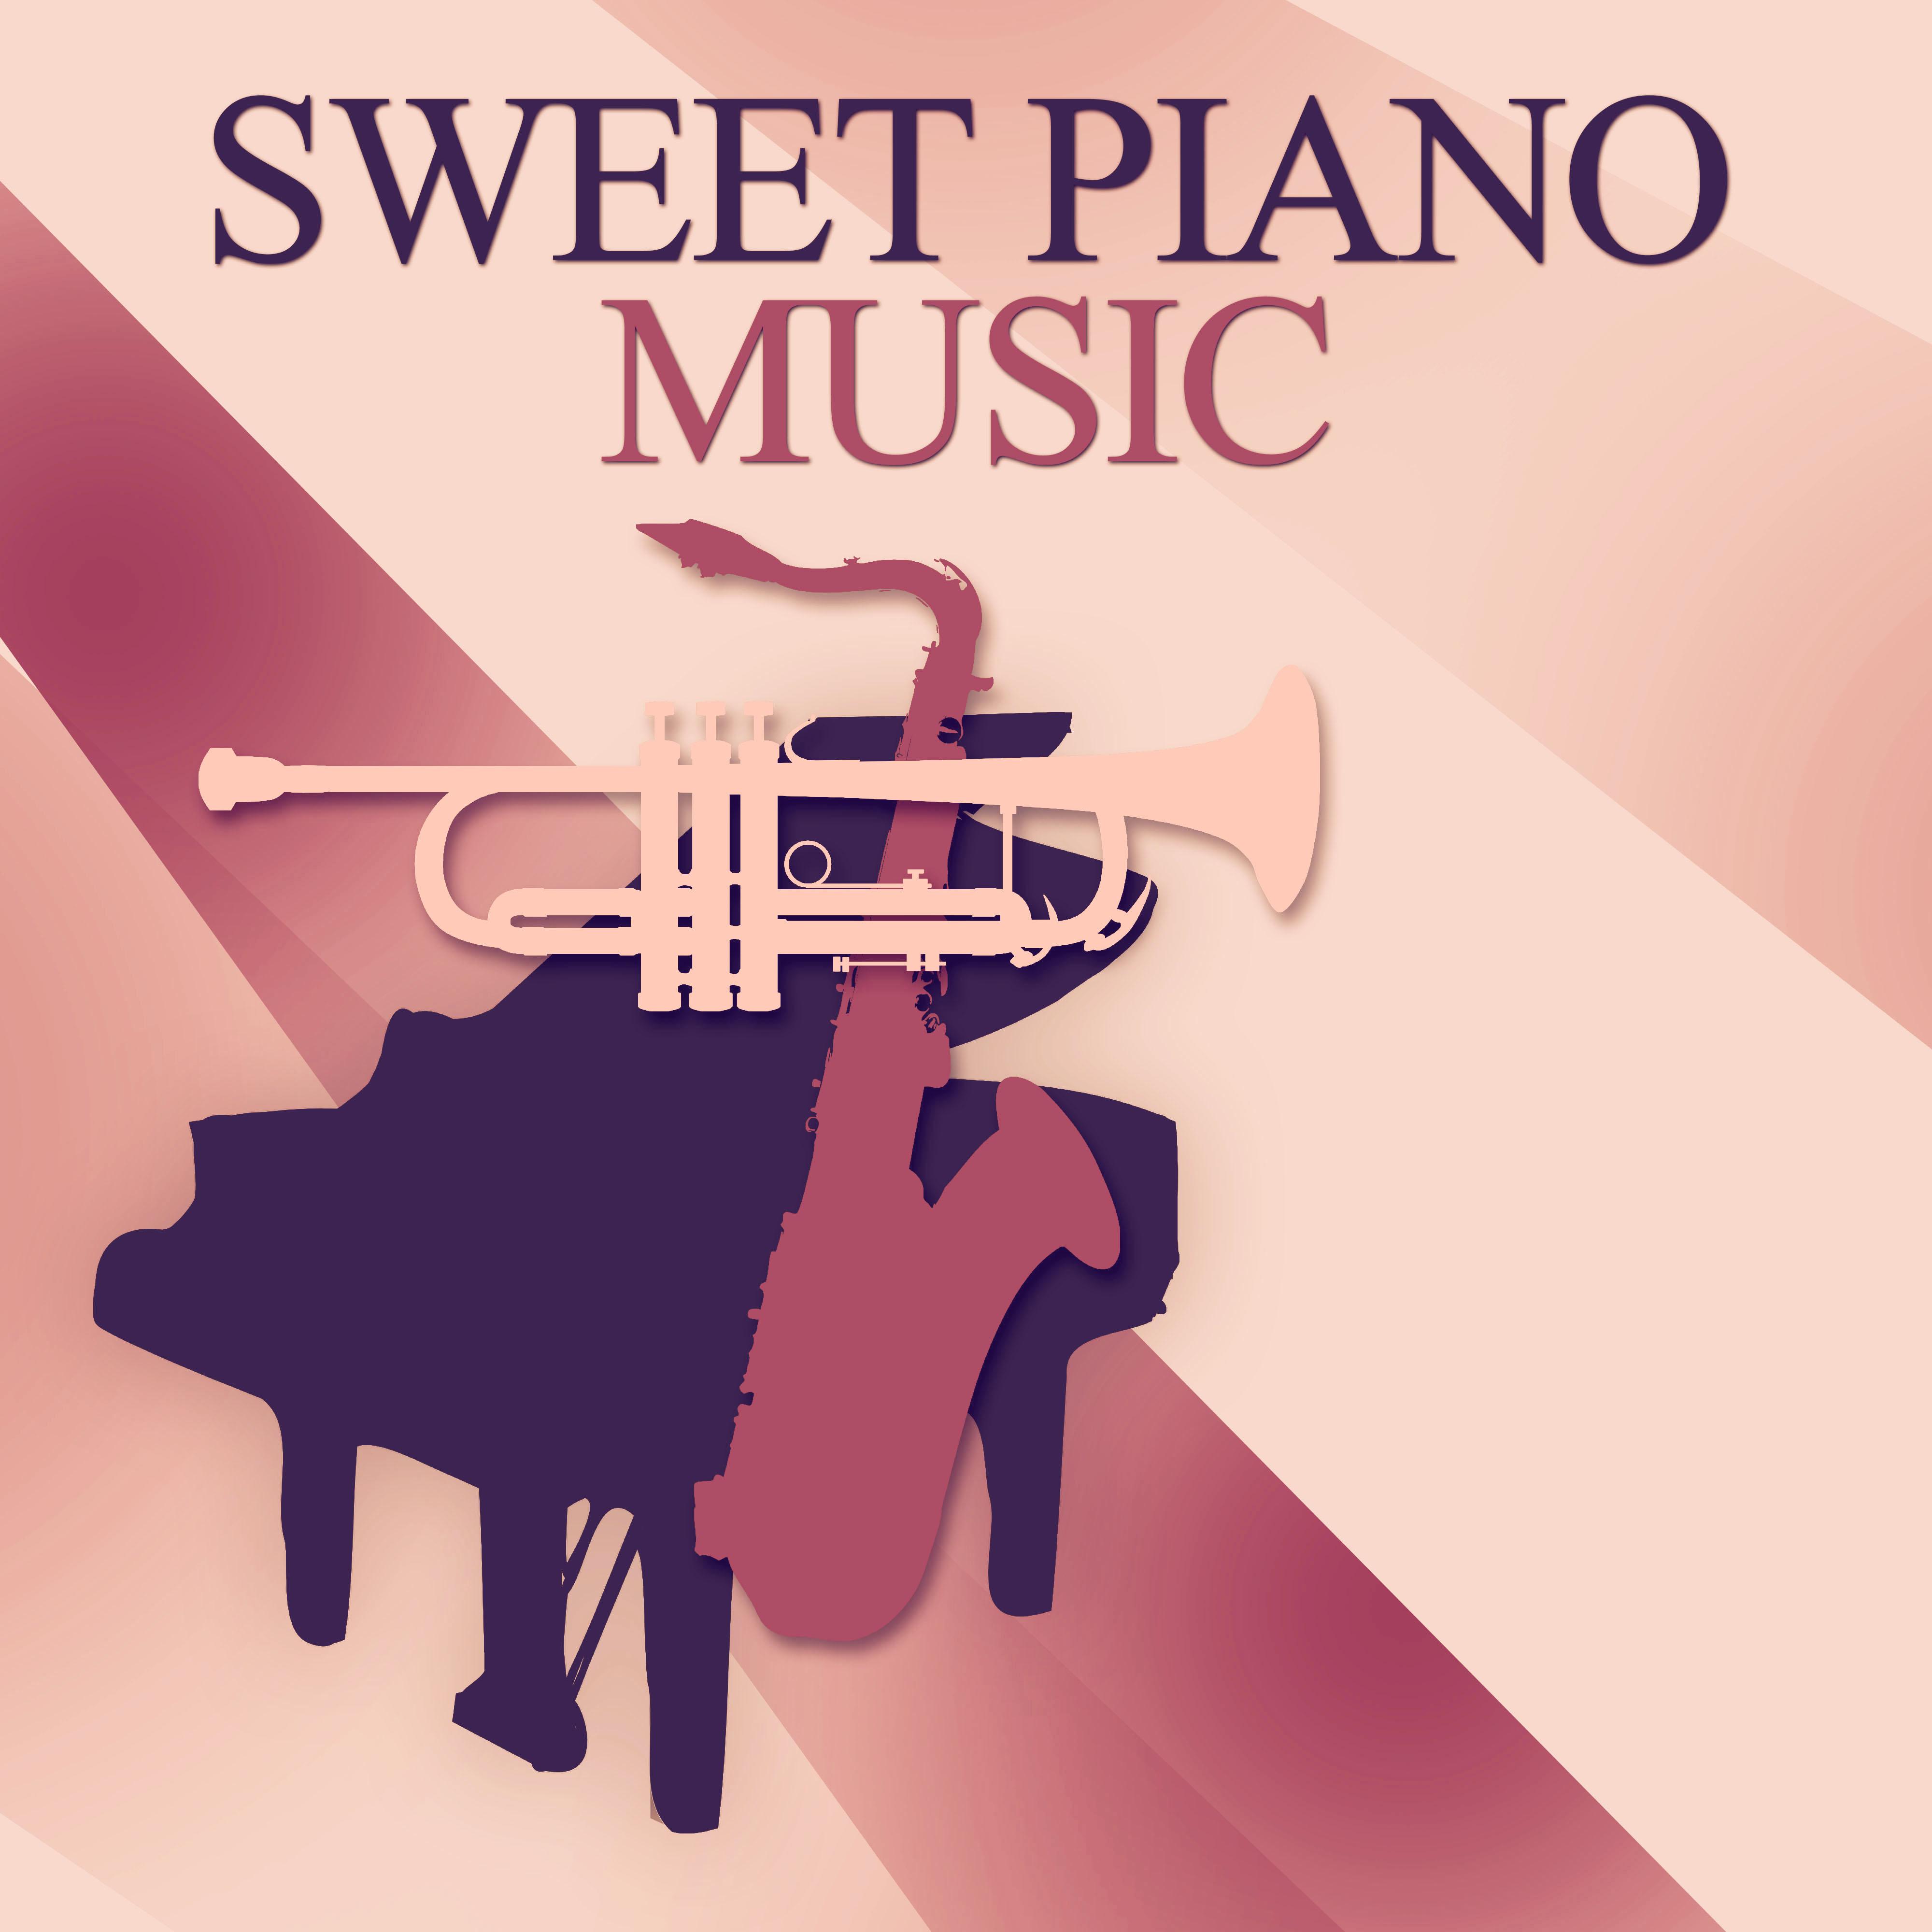 Sweet Piano Music  Swing Jazz Sounds for Cocktail Party, Instrumental Sounds with Positive Energy, Cafe Jazz, Simple and Beautiful